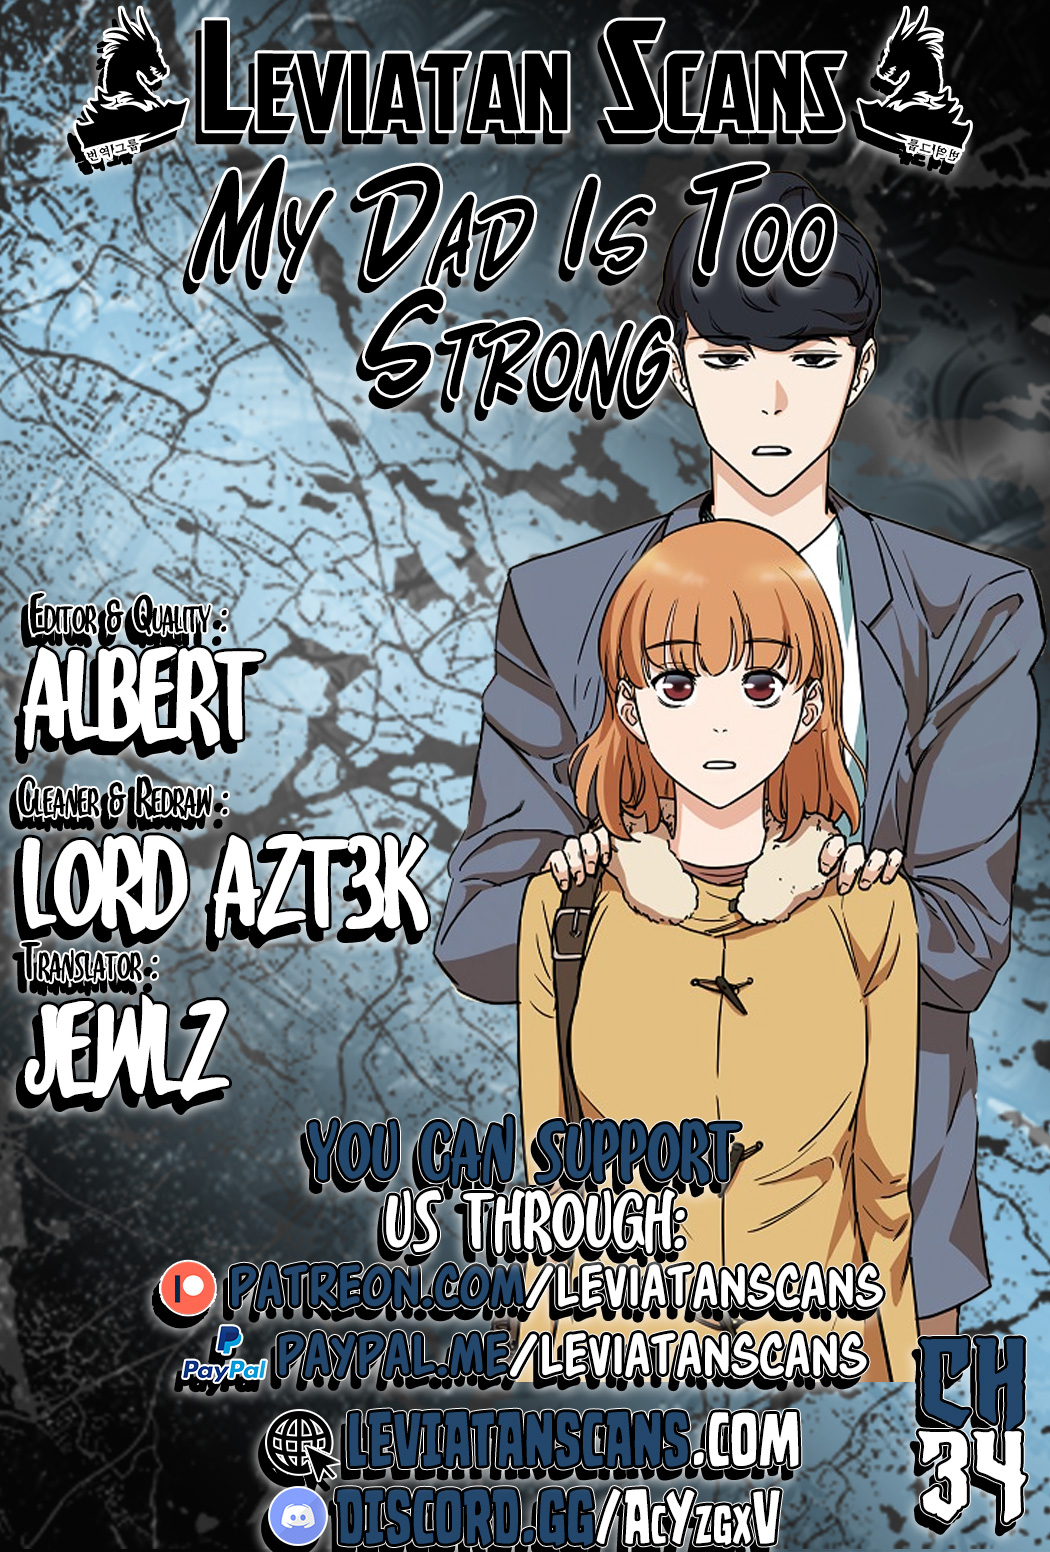 My Dad is Too Strong - Chapter 2613 - Image 1